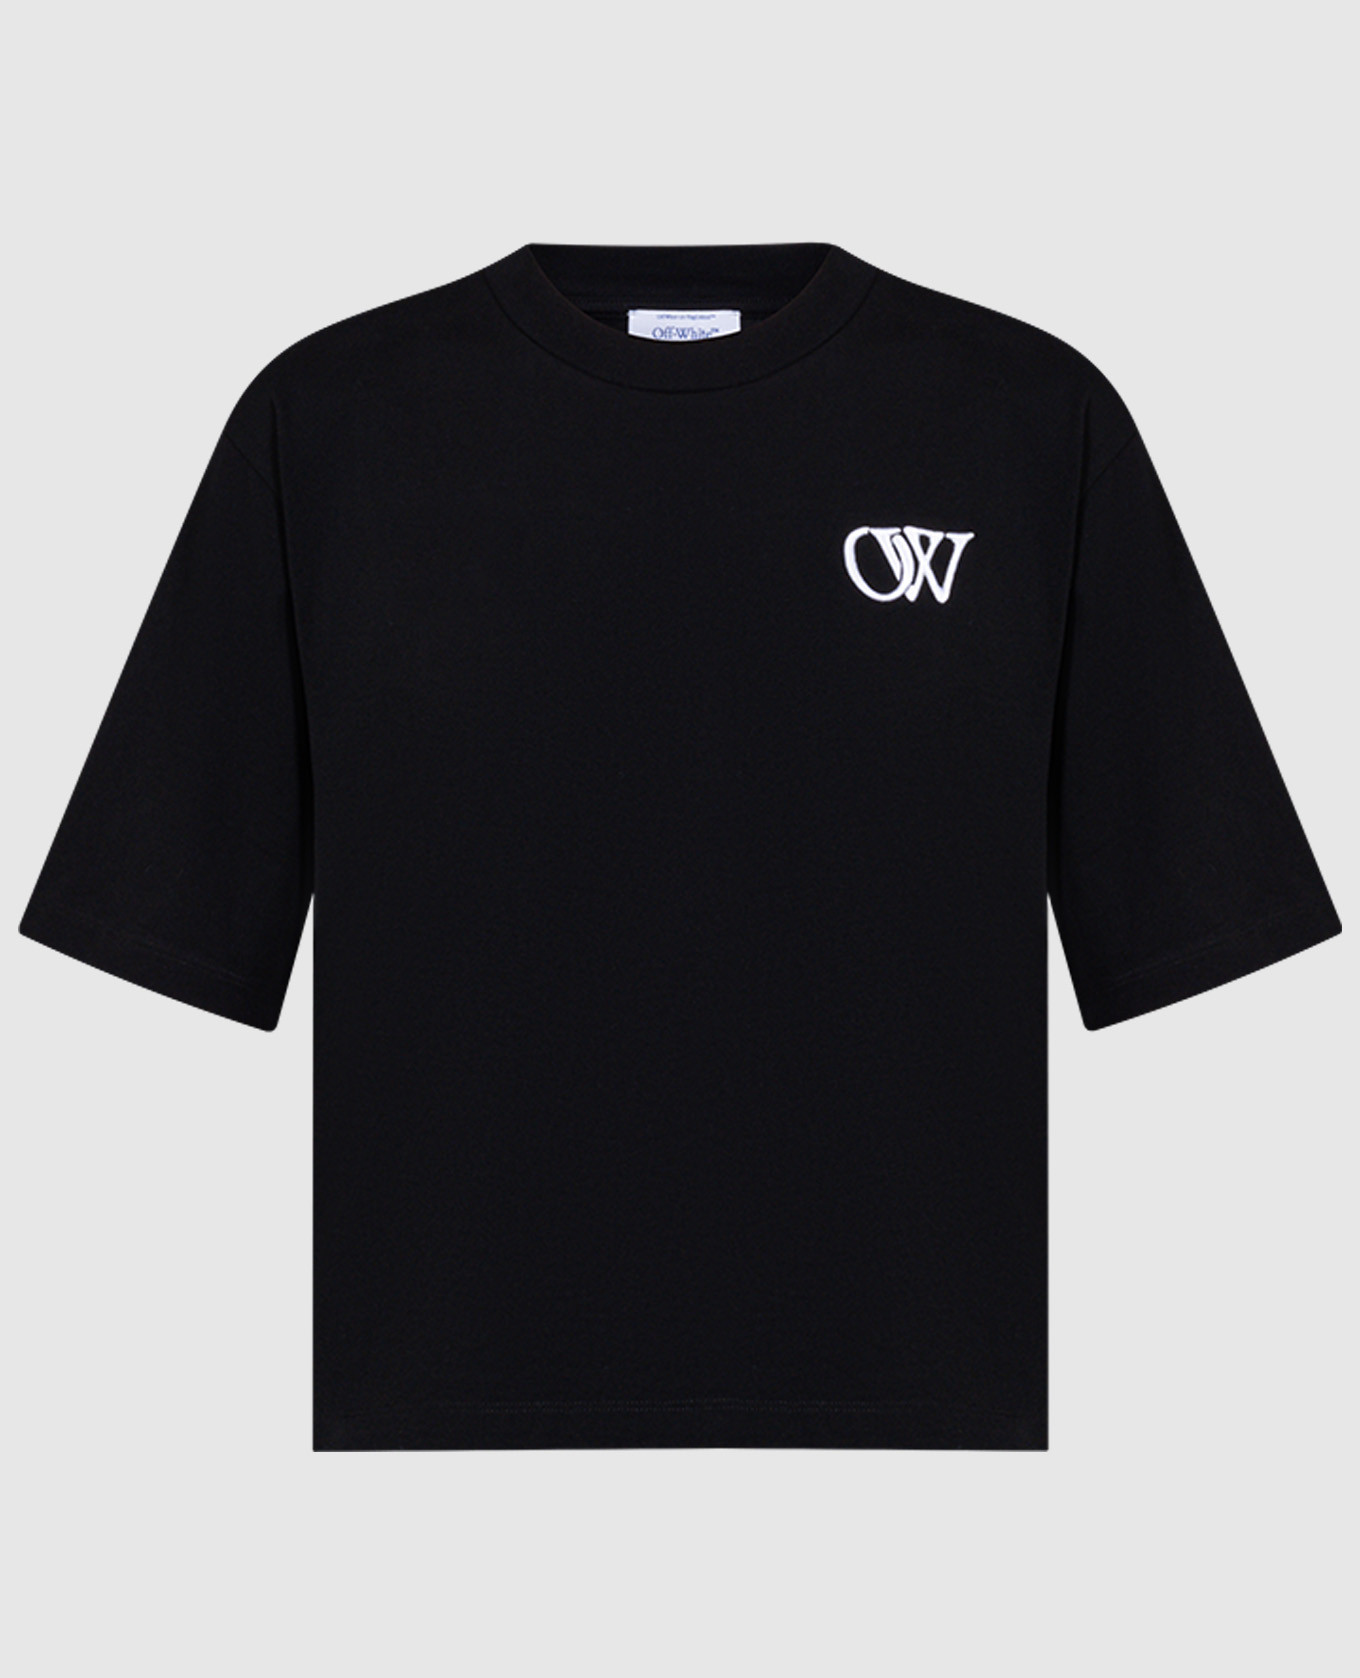 Black t-shirt with contrasting OW logo embroidery